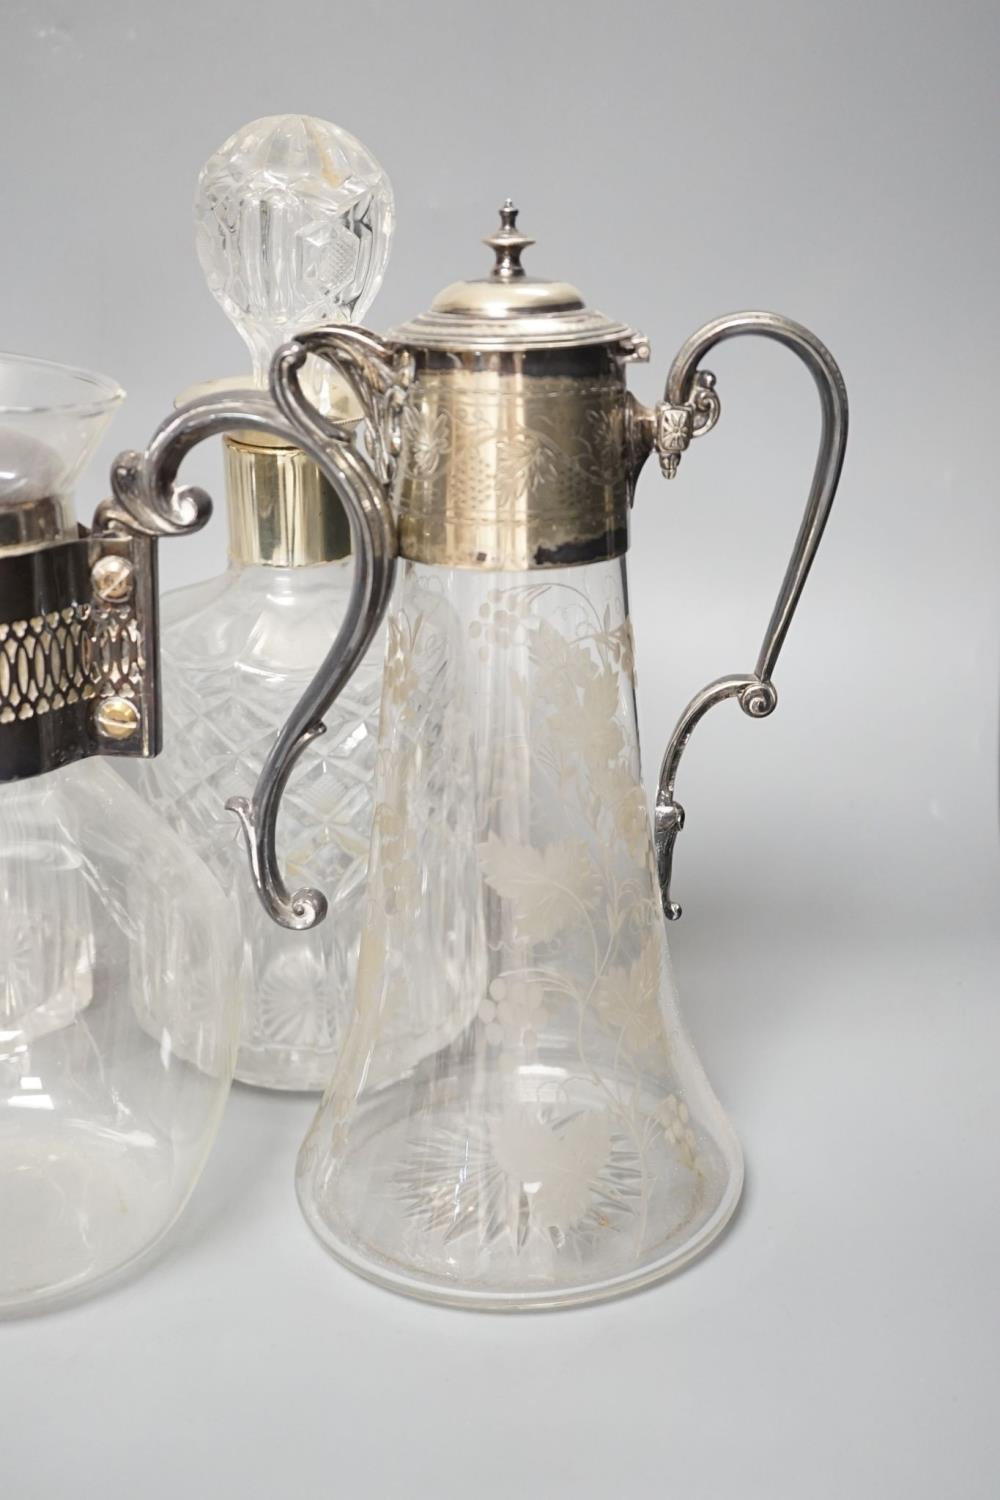 A Hukin and Heath claret jug and other decanters etc. - Image 5 of 9